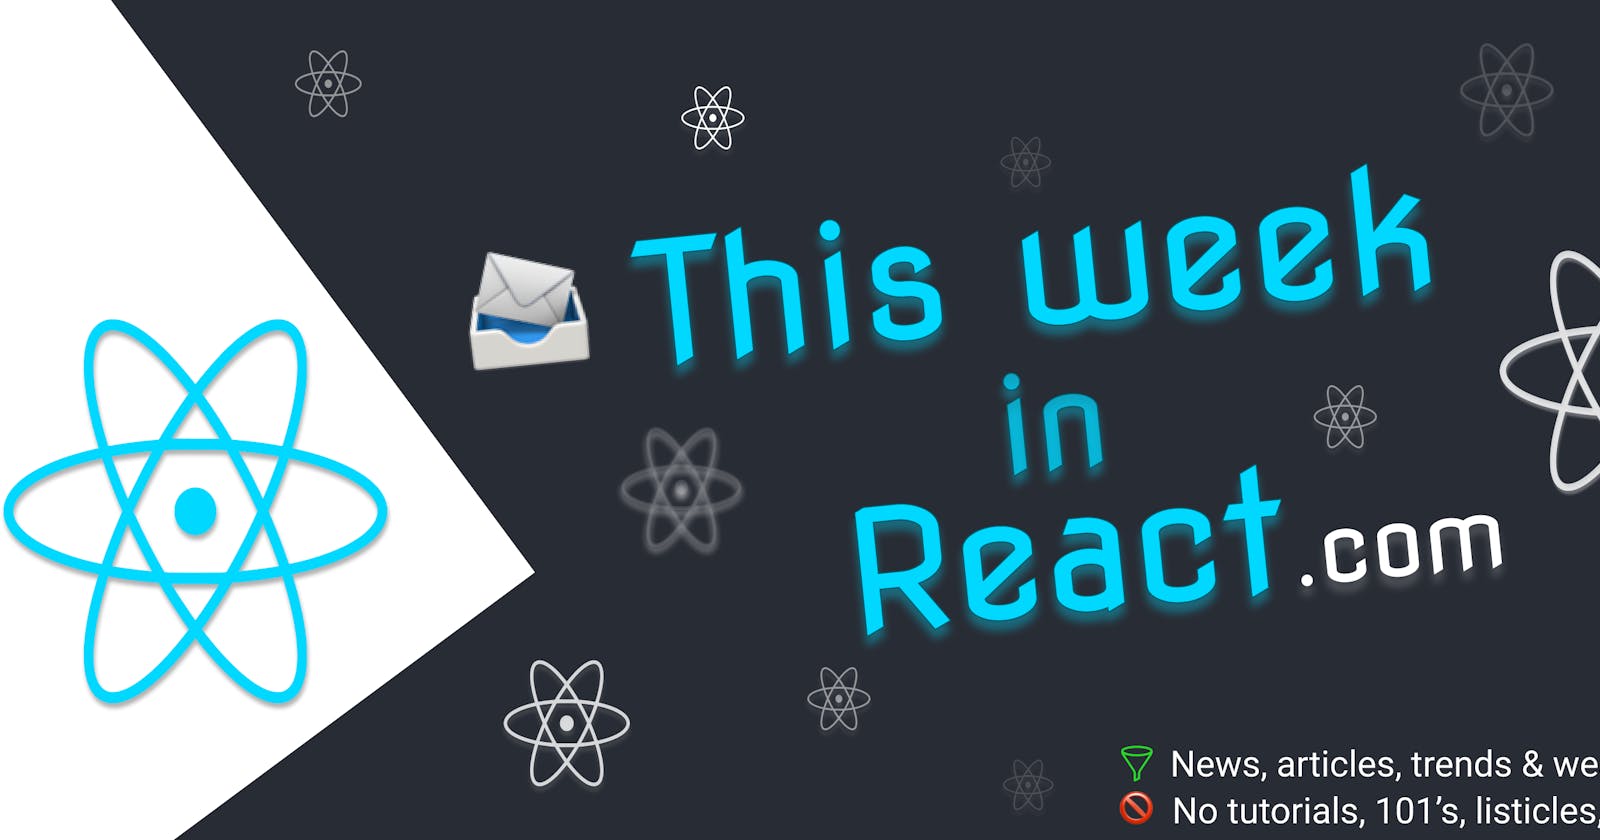 This Week In React #156: Server Actions, Stale Closures, React Falls Behind, Expo Builds, Suspense Throttling, React-Aria, Natuerlich, Obsidiosaurus..